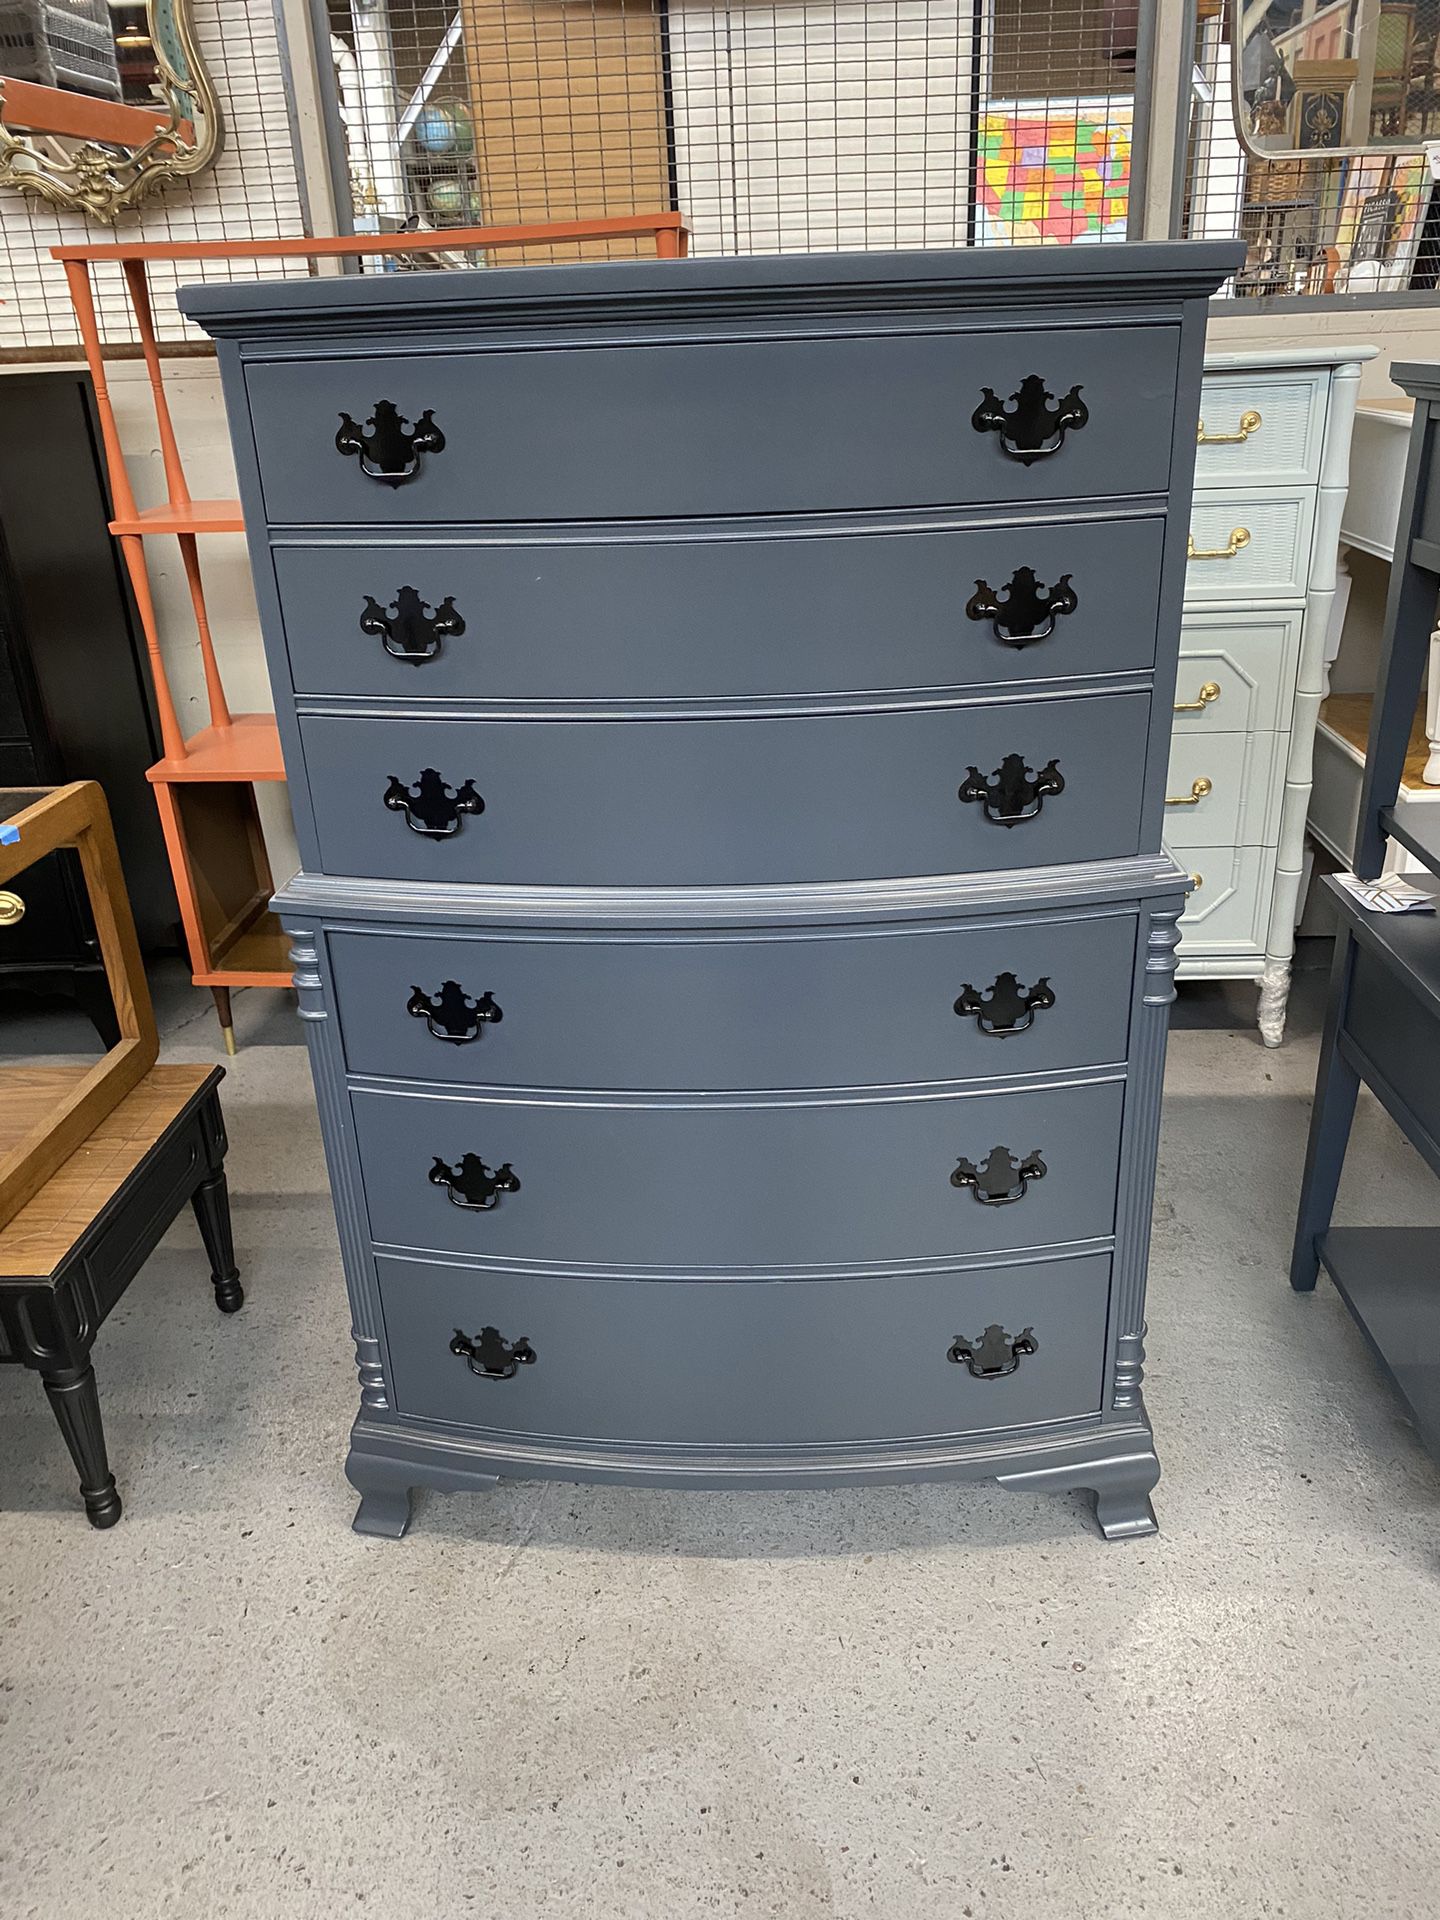 Tall Dresser Painted In Grey 